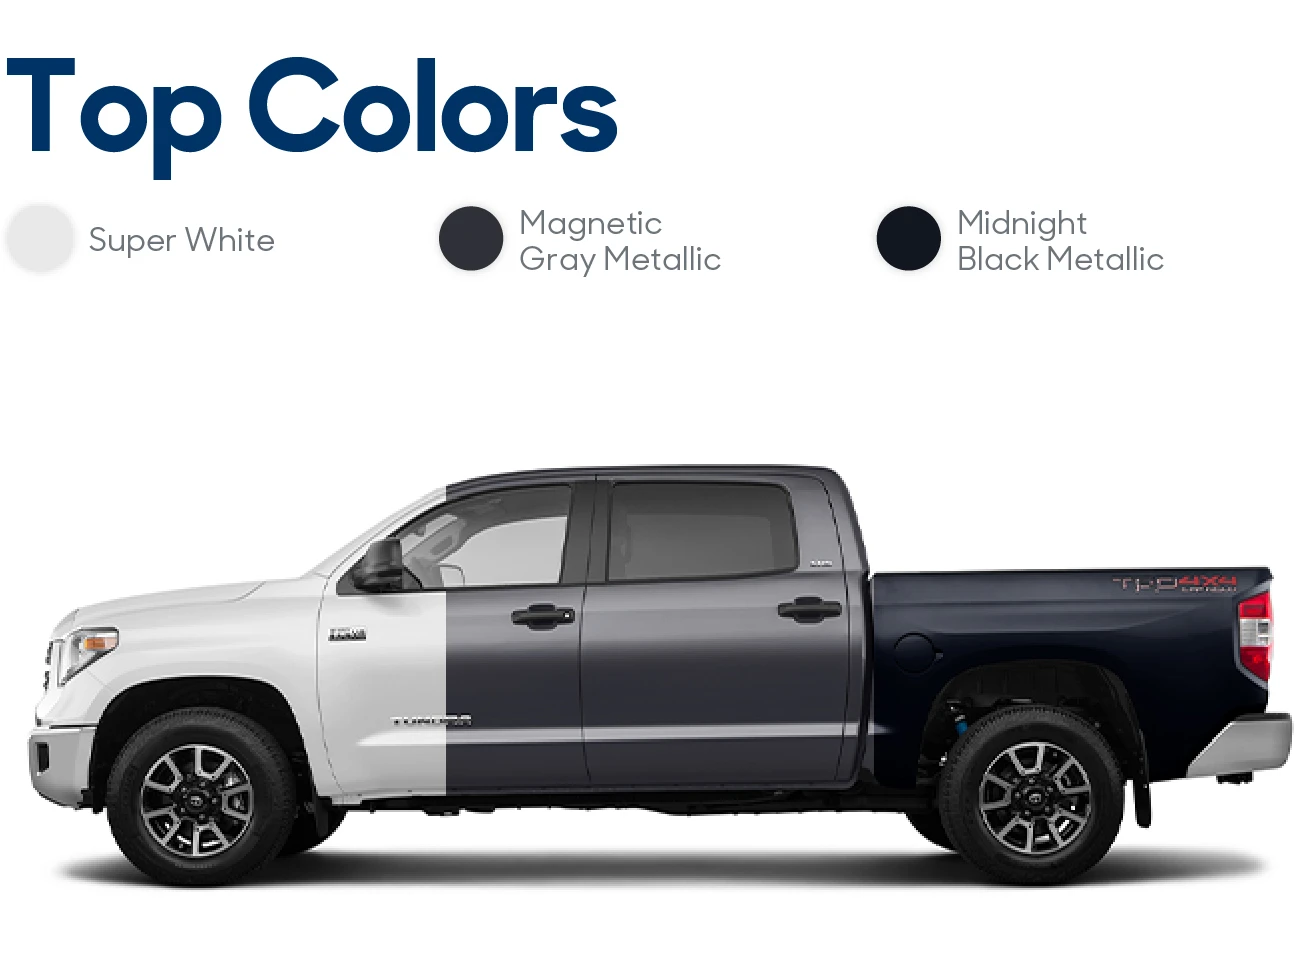 2018 Toyota Tundra: Reviews, Photos, and More: Color Options | CarMax